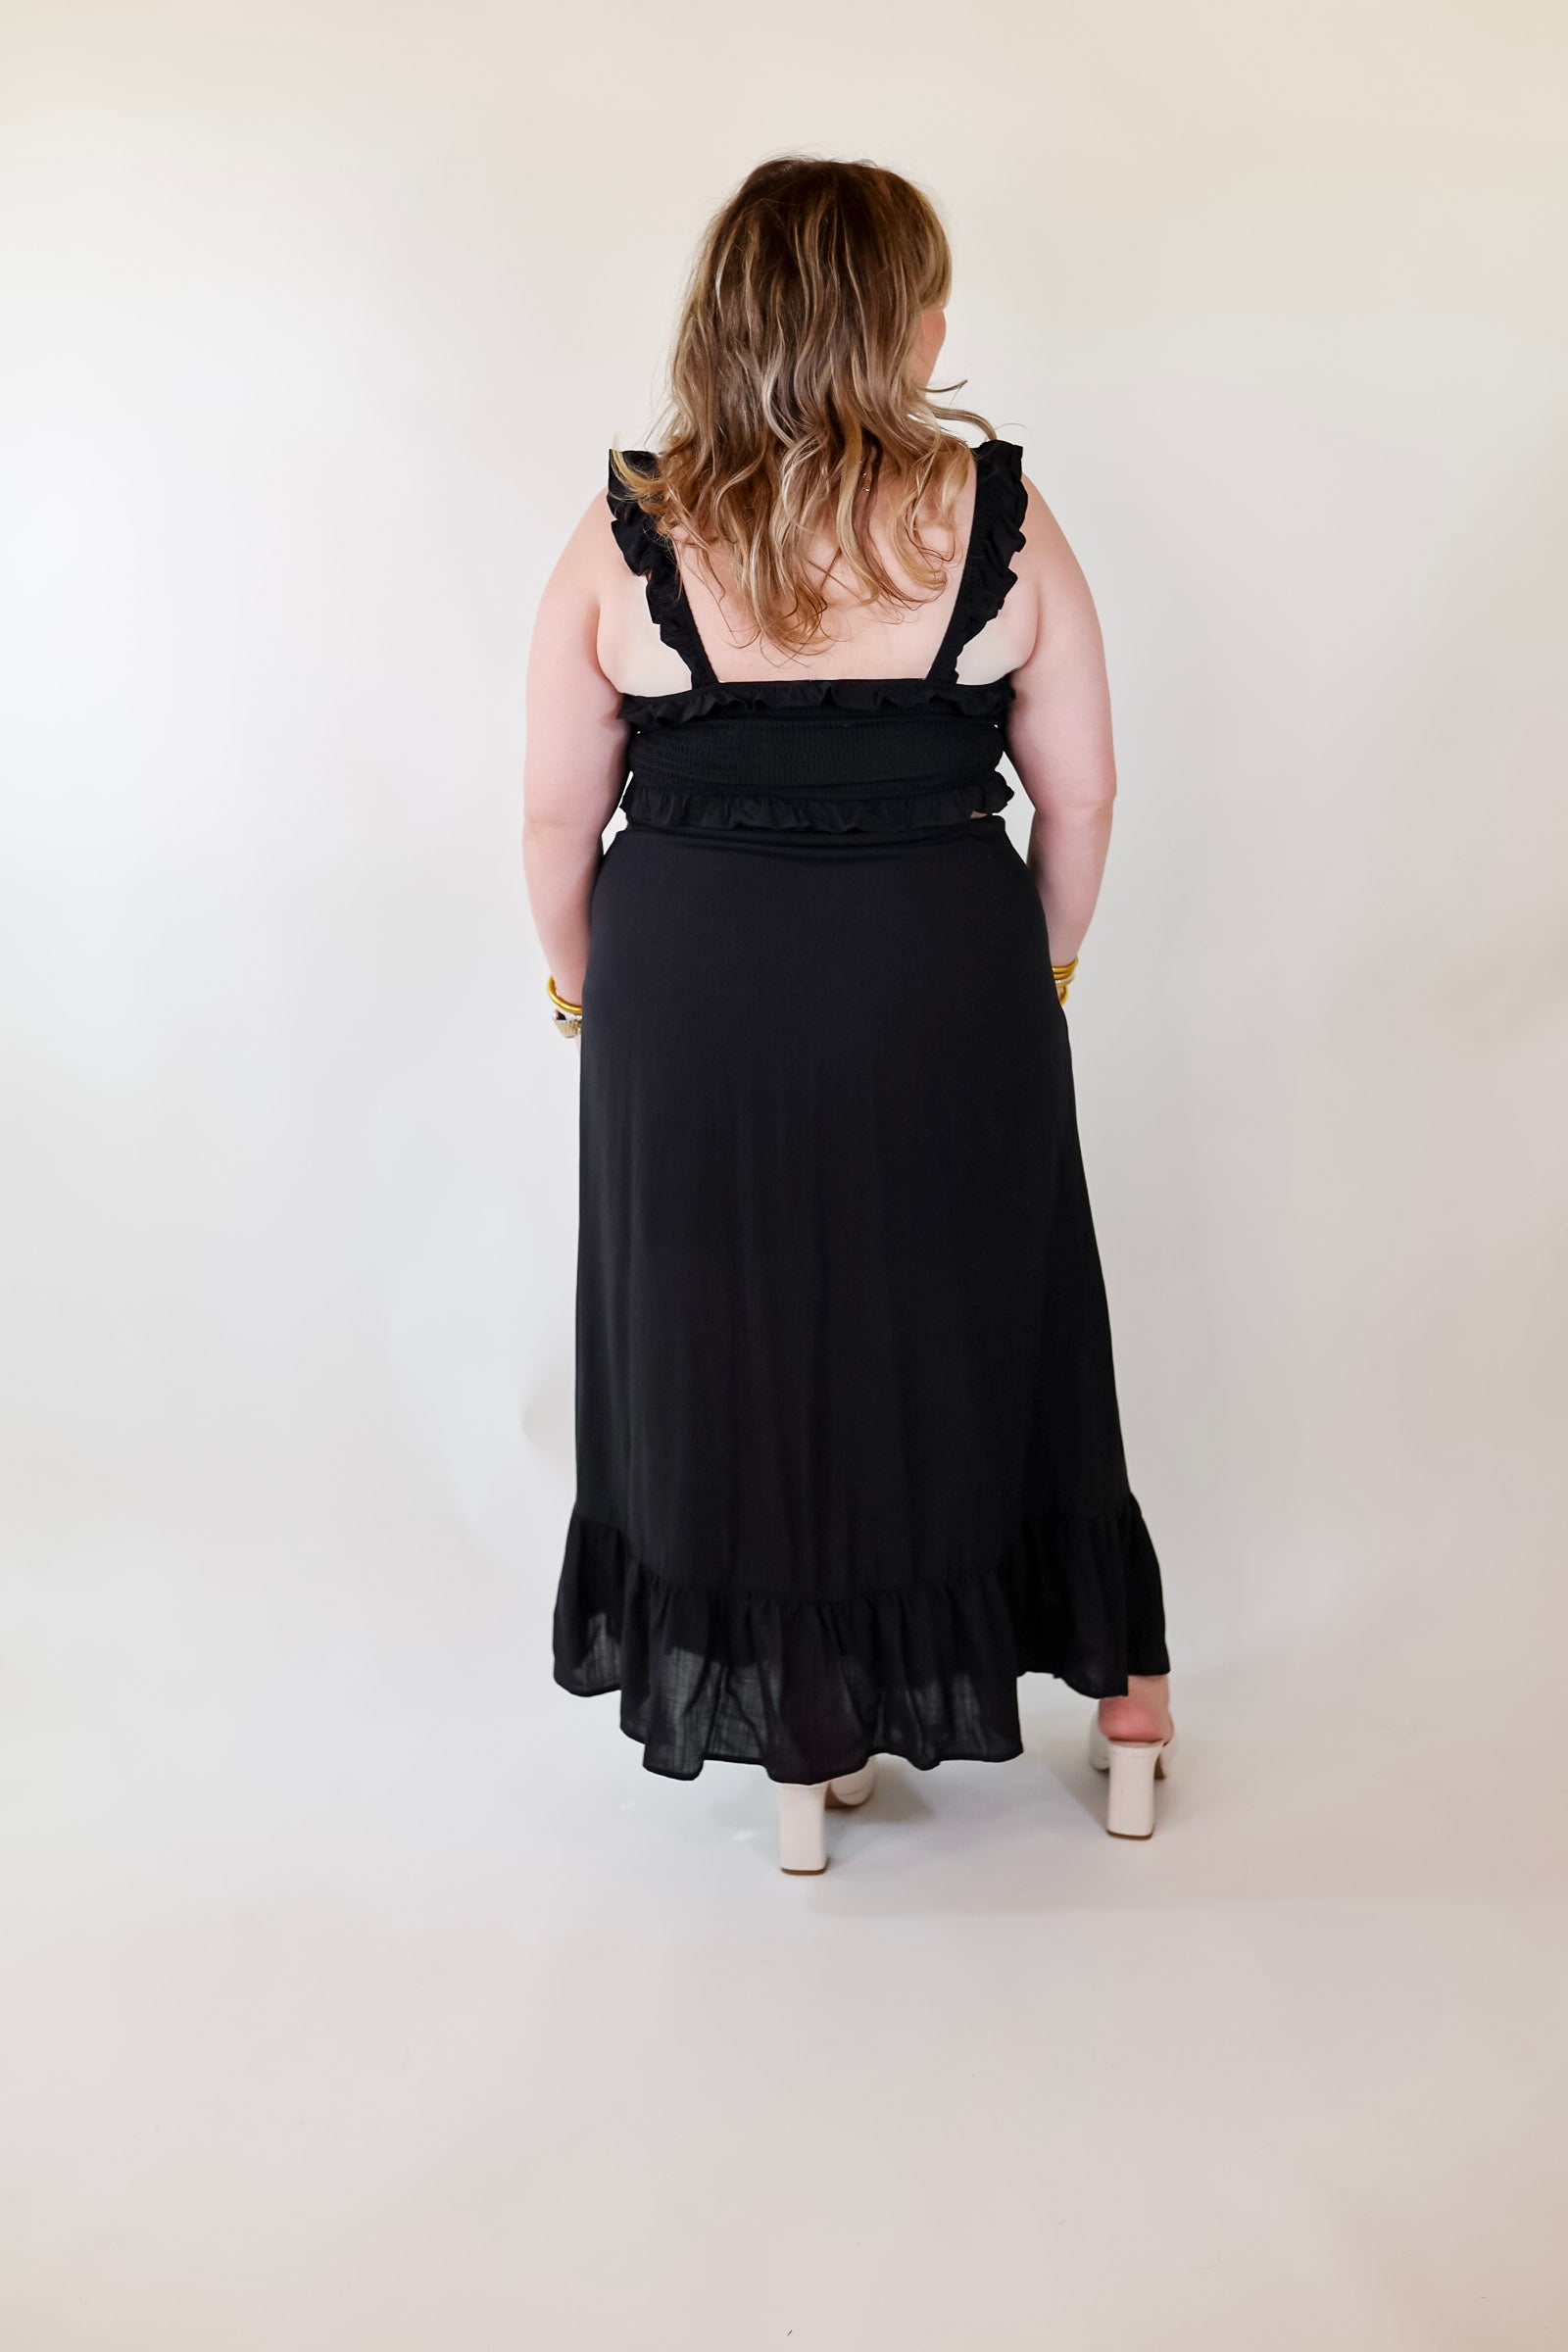 Talk About Beauty Tank Maxi Dress With Cutouts and Ruffles in Black - Giddy Up Glamour Boutique